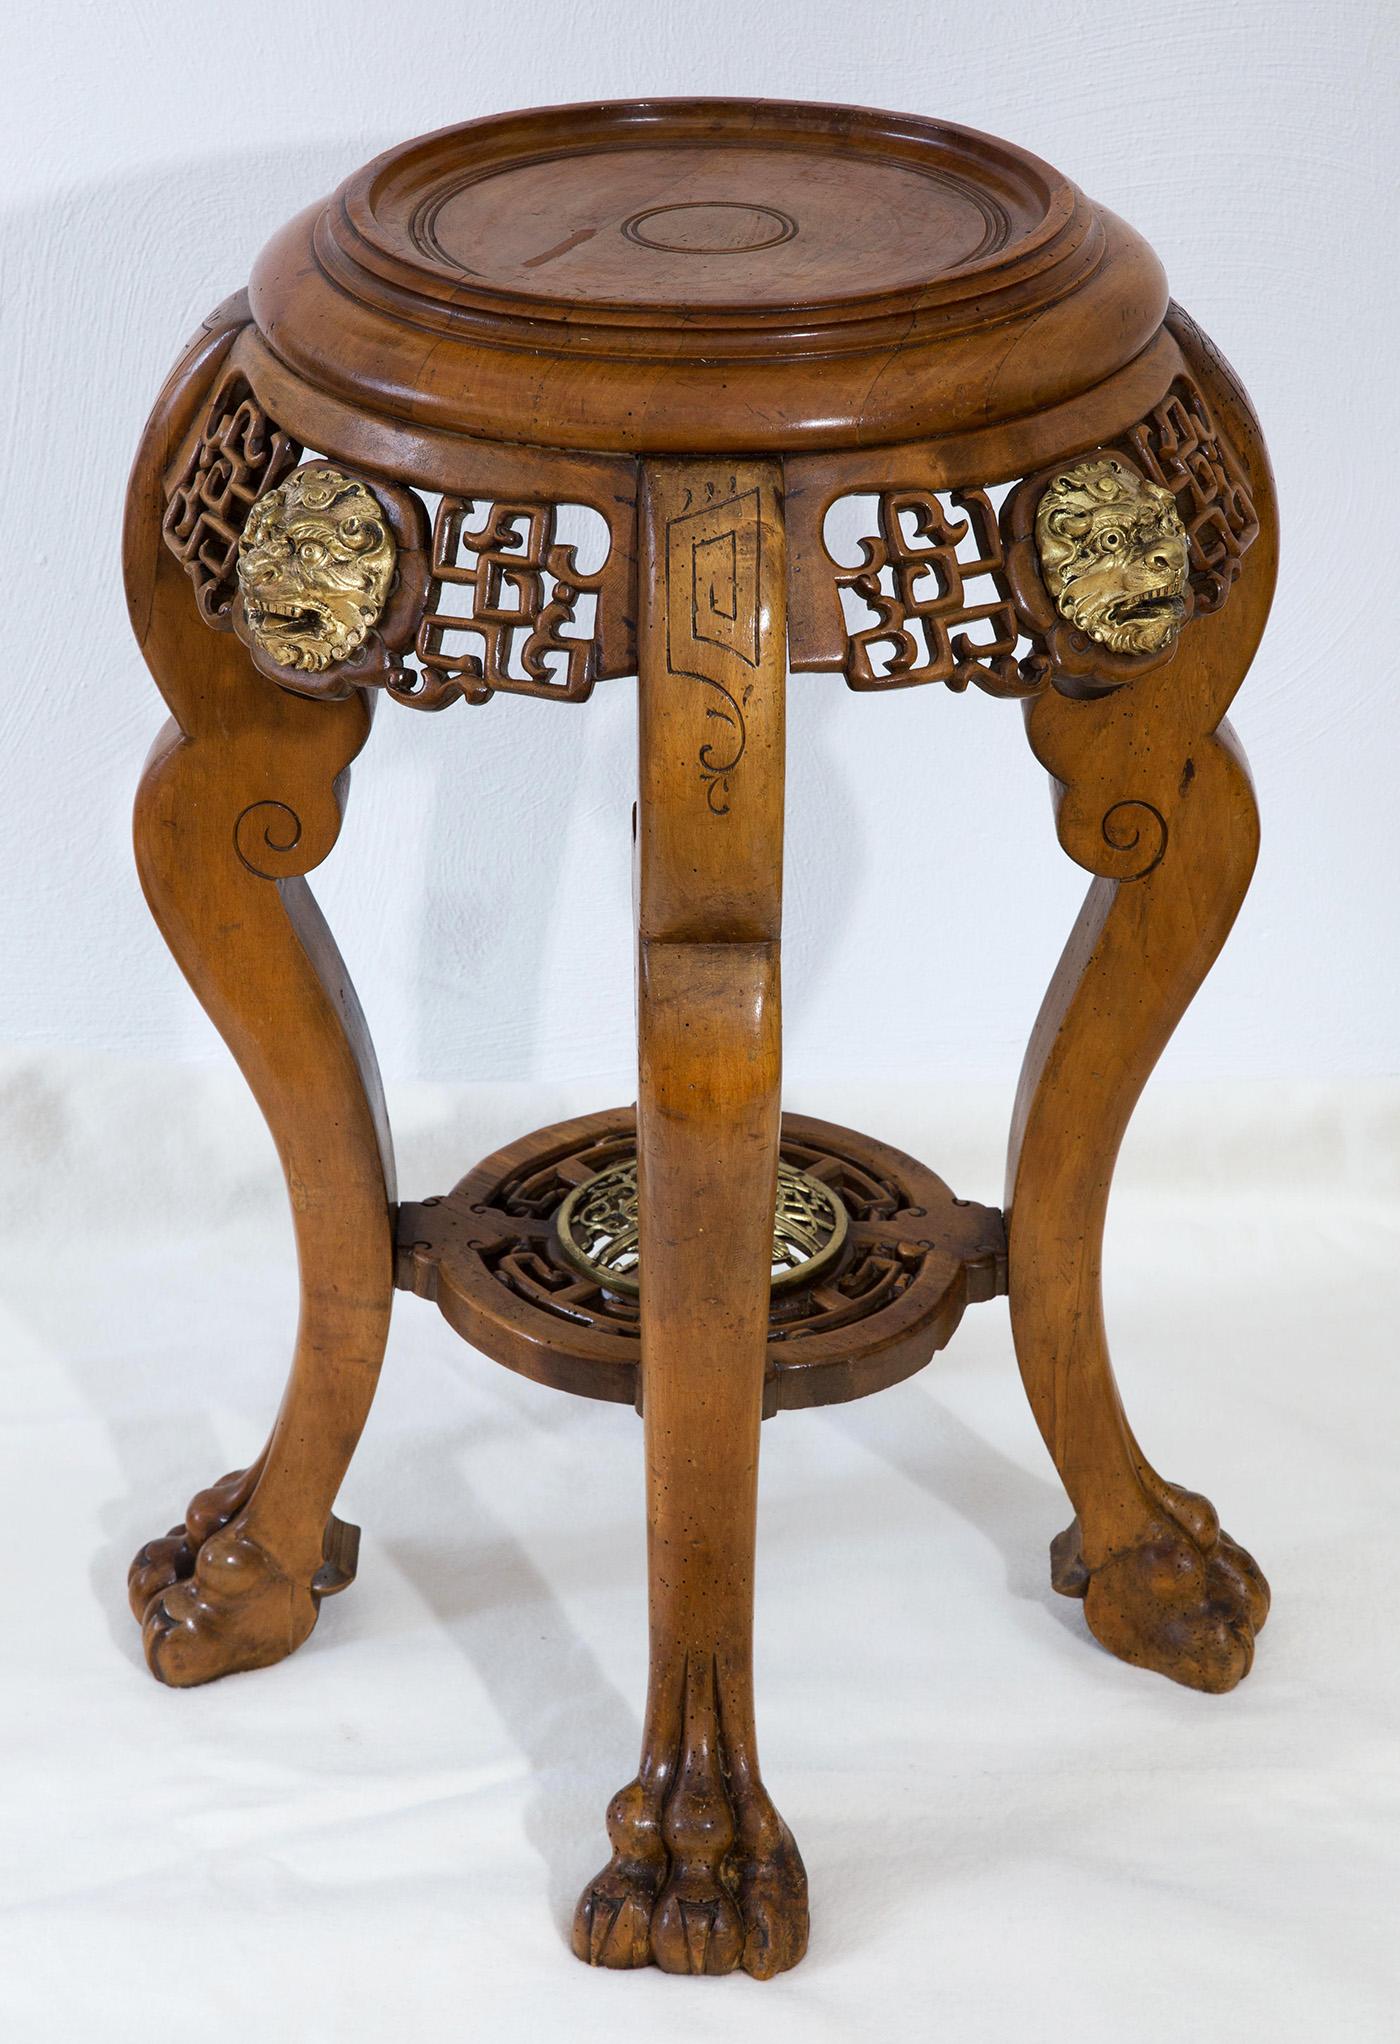 Plant stand/ Gueridon/ side table
Paris ca. 1900
False bamboo, Brighton chinoiserie style
Medaillons of bronzes of lions heads
Sculpted Chinese symbols
Stable, ready to use.
  